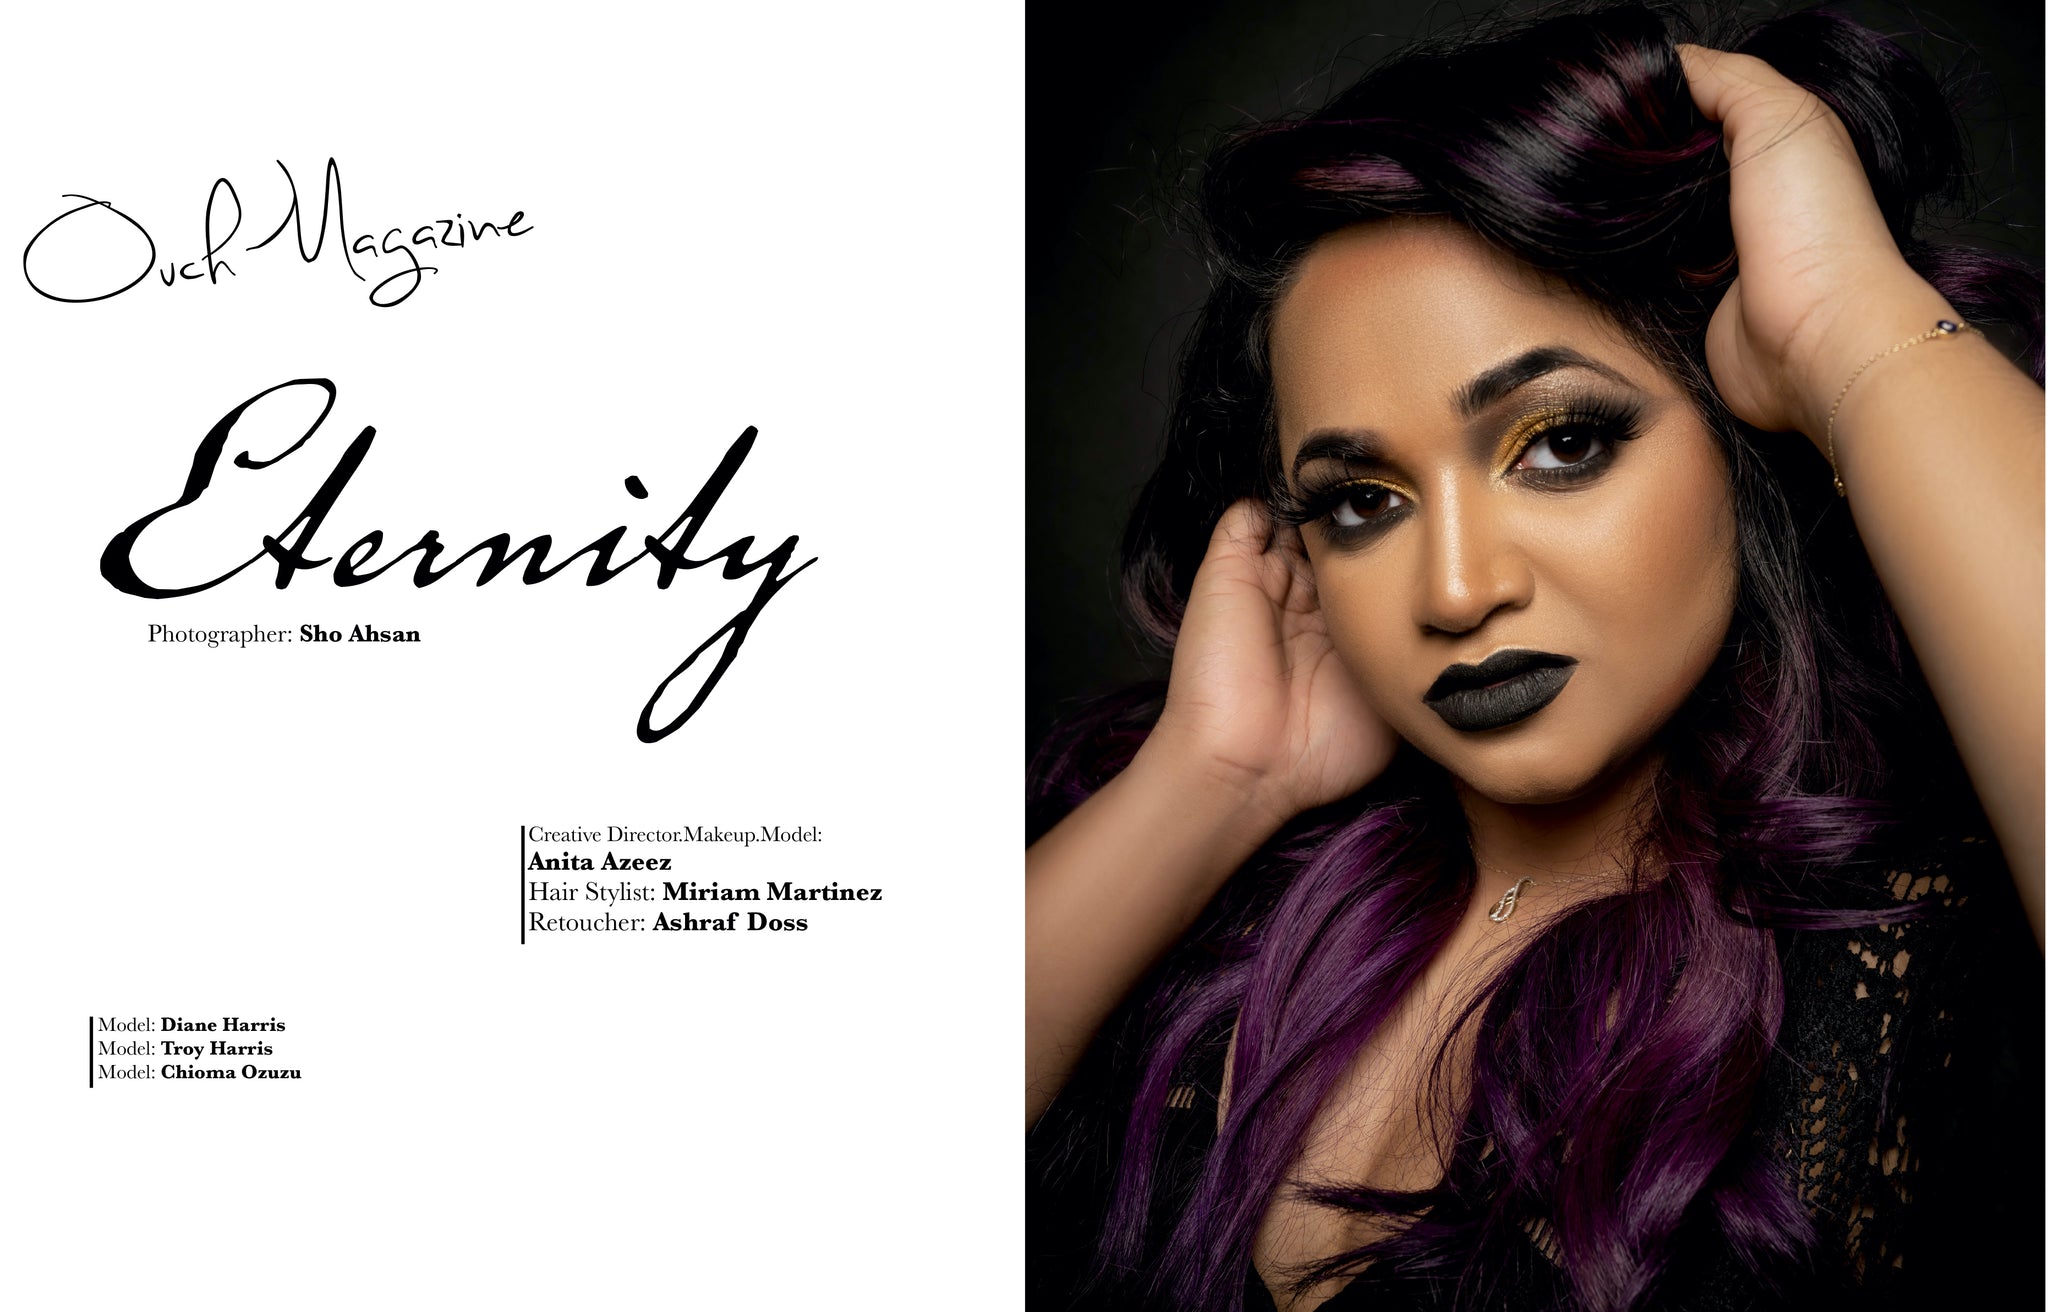 Eternity/ouch magazine/1